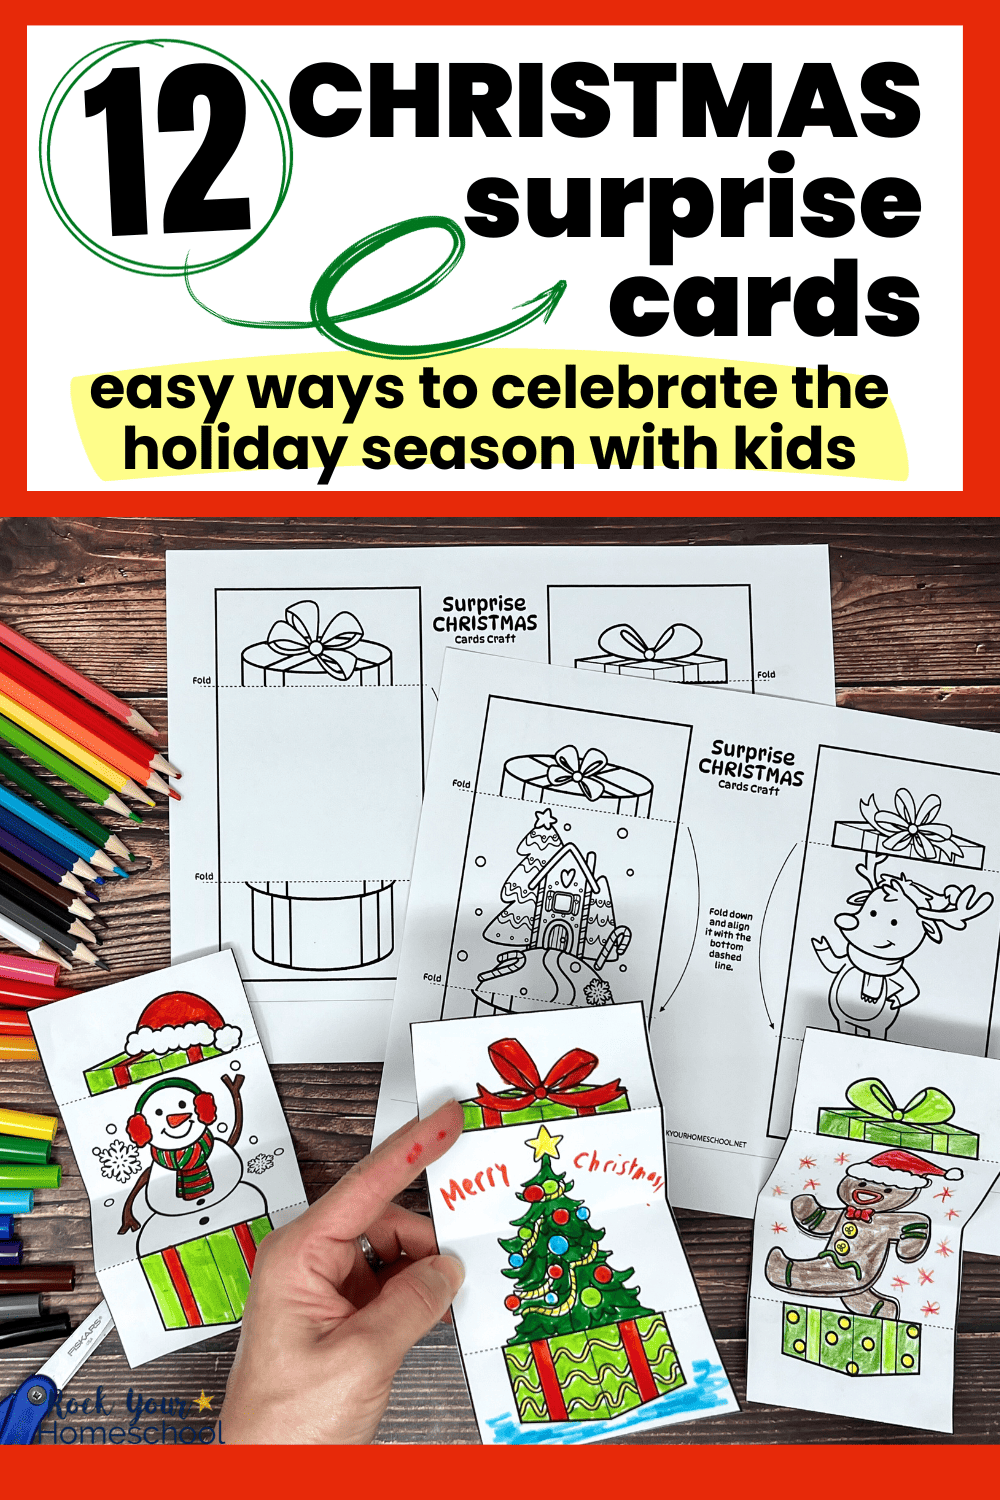 Christmas Cards for Kids: 12 Styles to Color for Fun Surprises (Free)